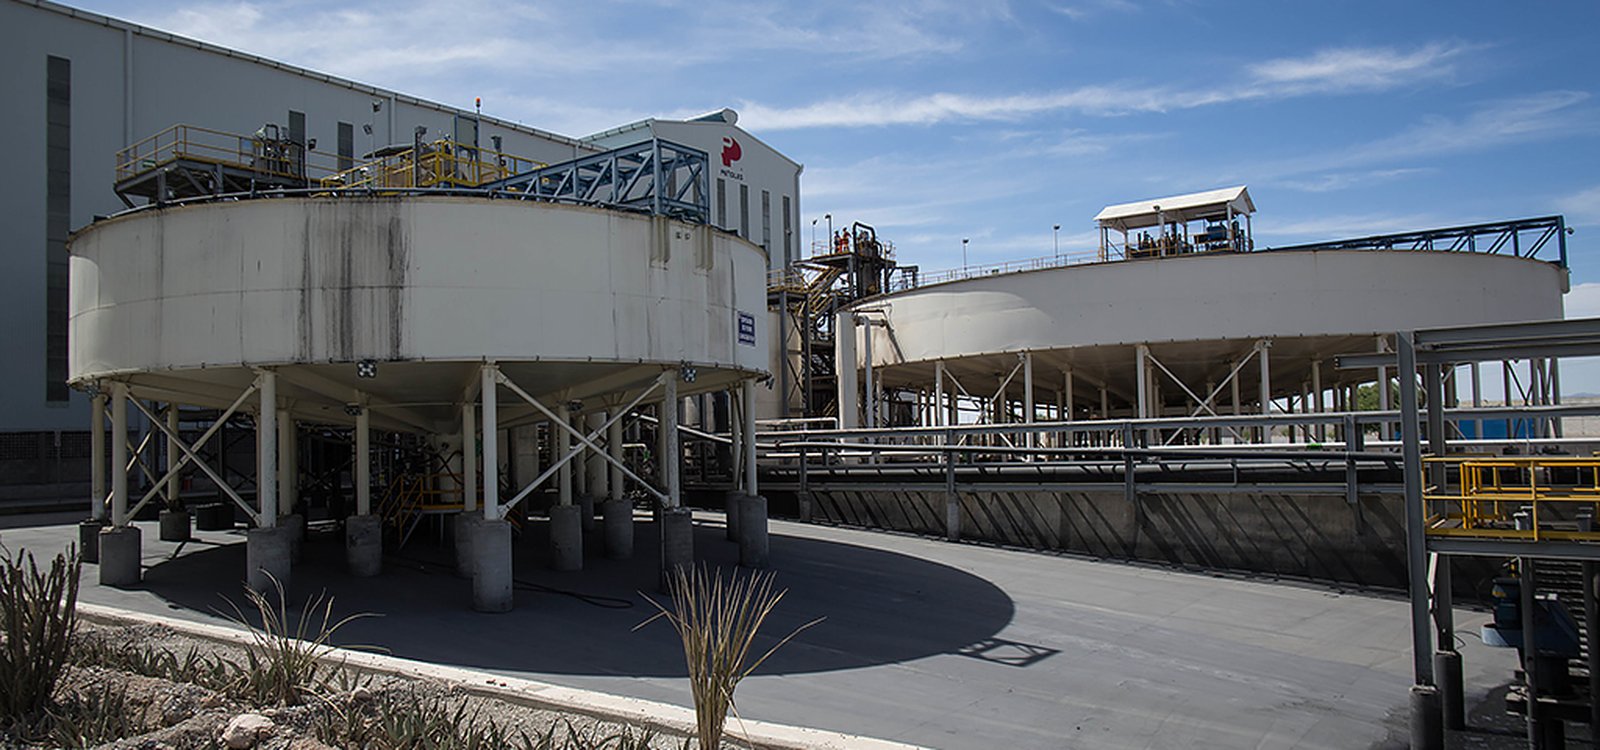 Velardeña does not send wastewater into a nearby arroyo; instead, using water treatment plants, it reuses and recycles the water to meet the needs of the mine.